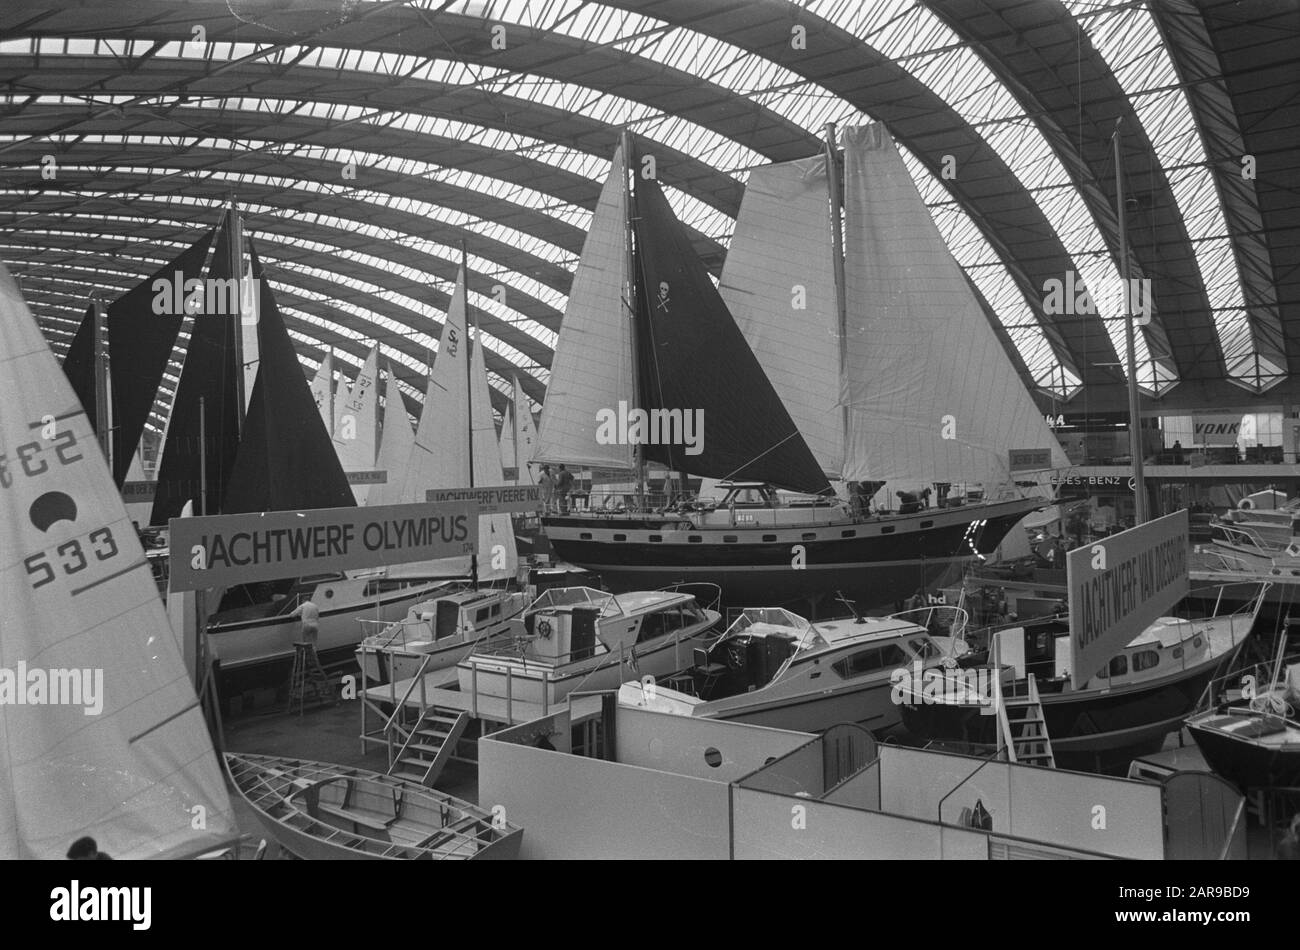 Fifteenth HISWA in RAI Amsterdam. Preparations. The largest sailing ship The Pirate Date: March 12, 1970 Location: Amsterdam, Noord-Holland Institution name: HISWA Stock Photo